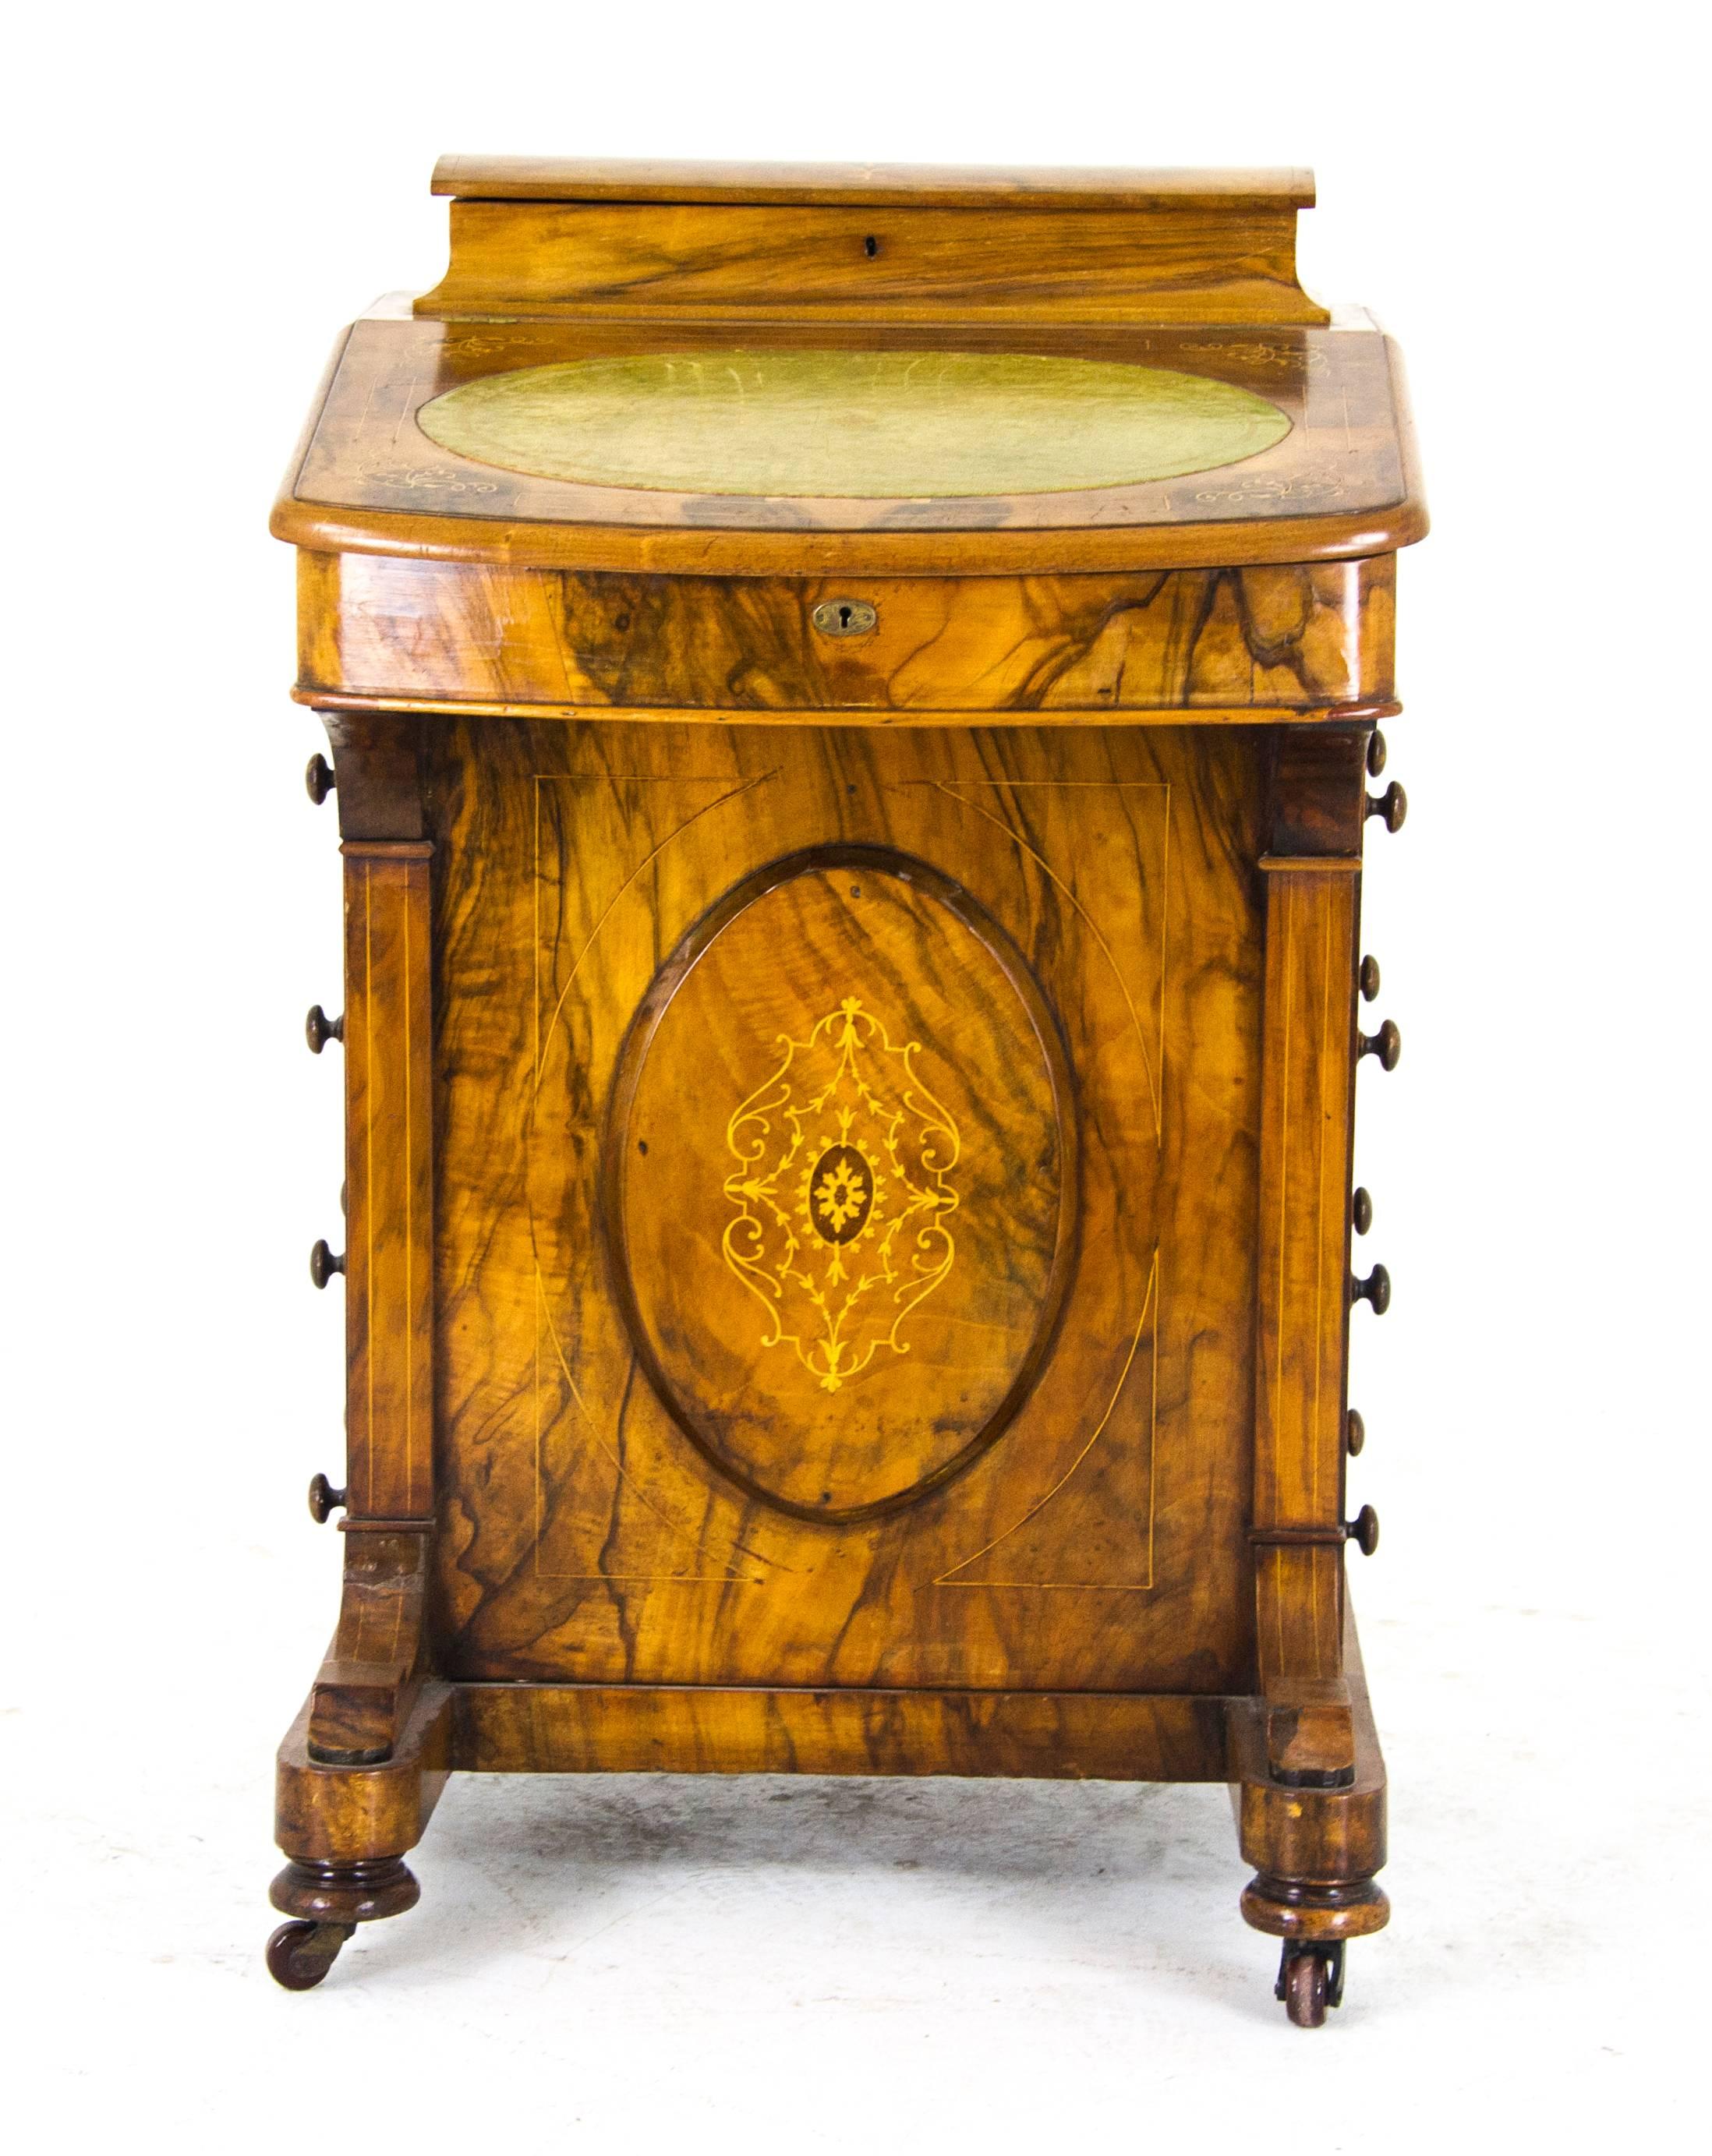 Scotland, 1860
Original finish
Attractive grain in the burr walnut
Highlighted with crossband in ebony and boxwood stringing
Inlaid lift top with fitted interior
Inlaid slant top with embossed leather
Fitted interior with single drawer and